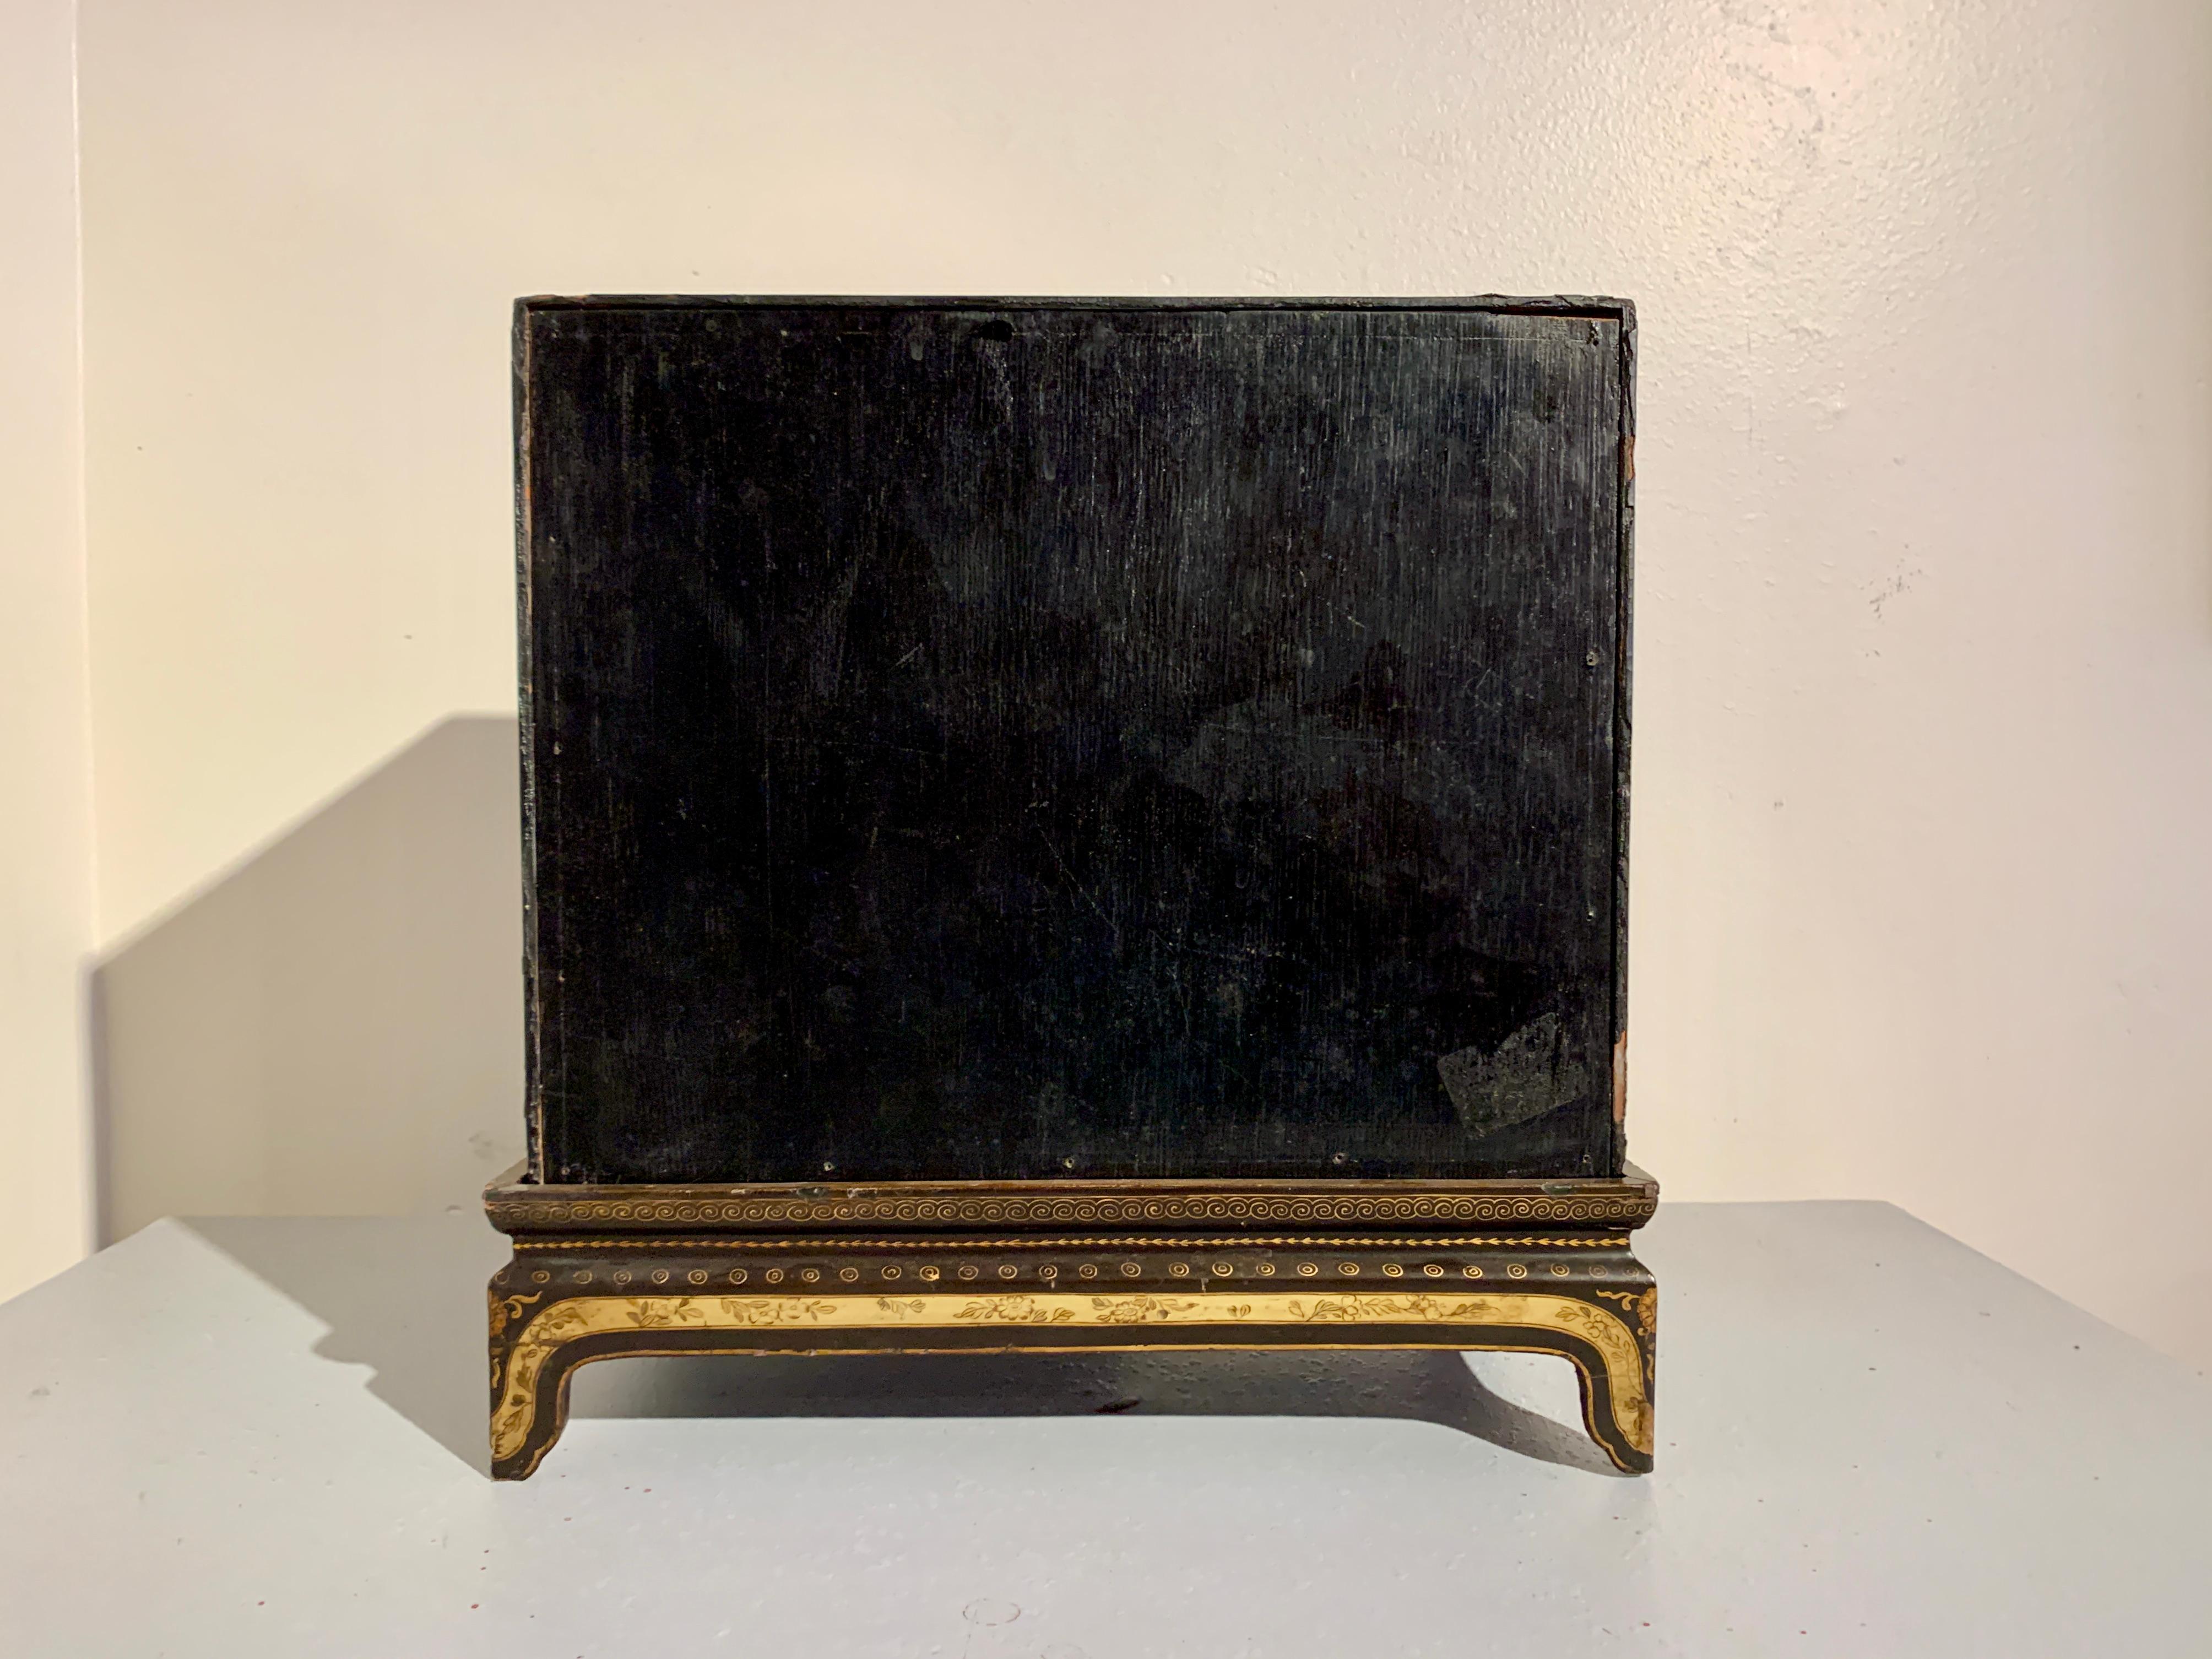 Softwood Chinese Export Black Lacquer and Gilt Painted Small Cabinet, Mid 19th Century